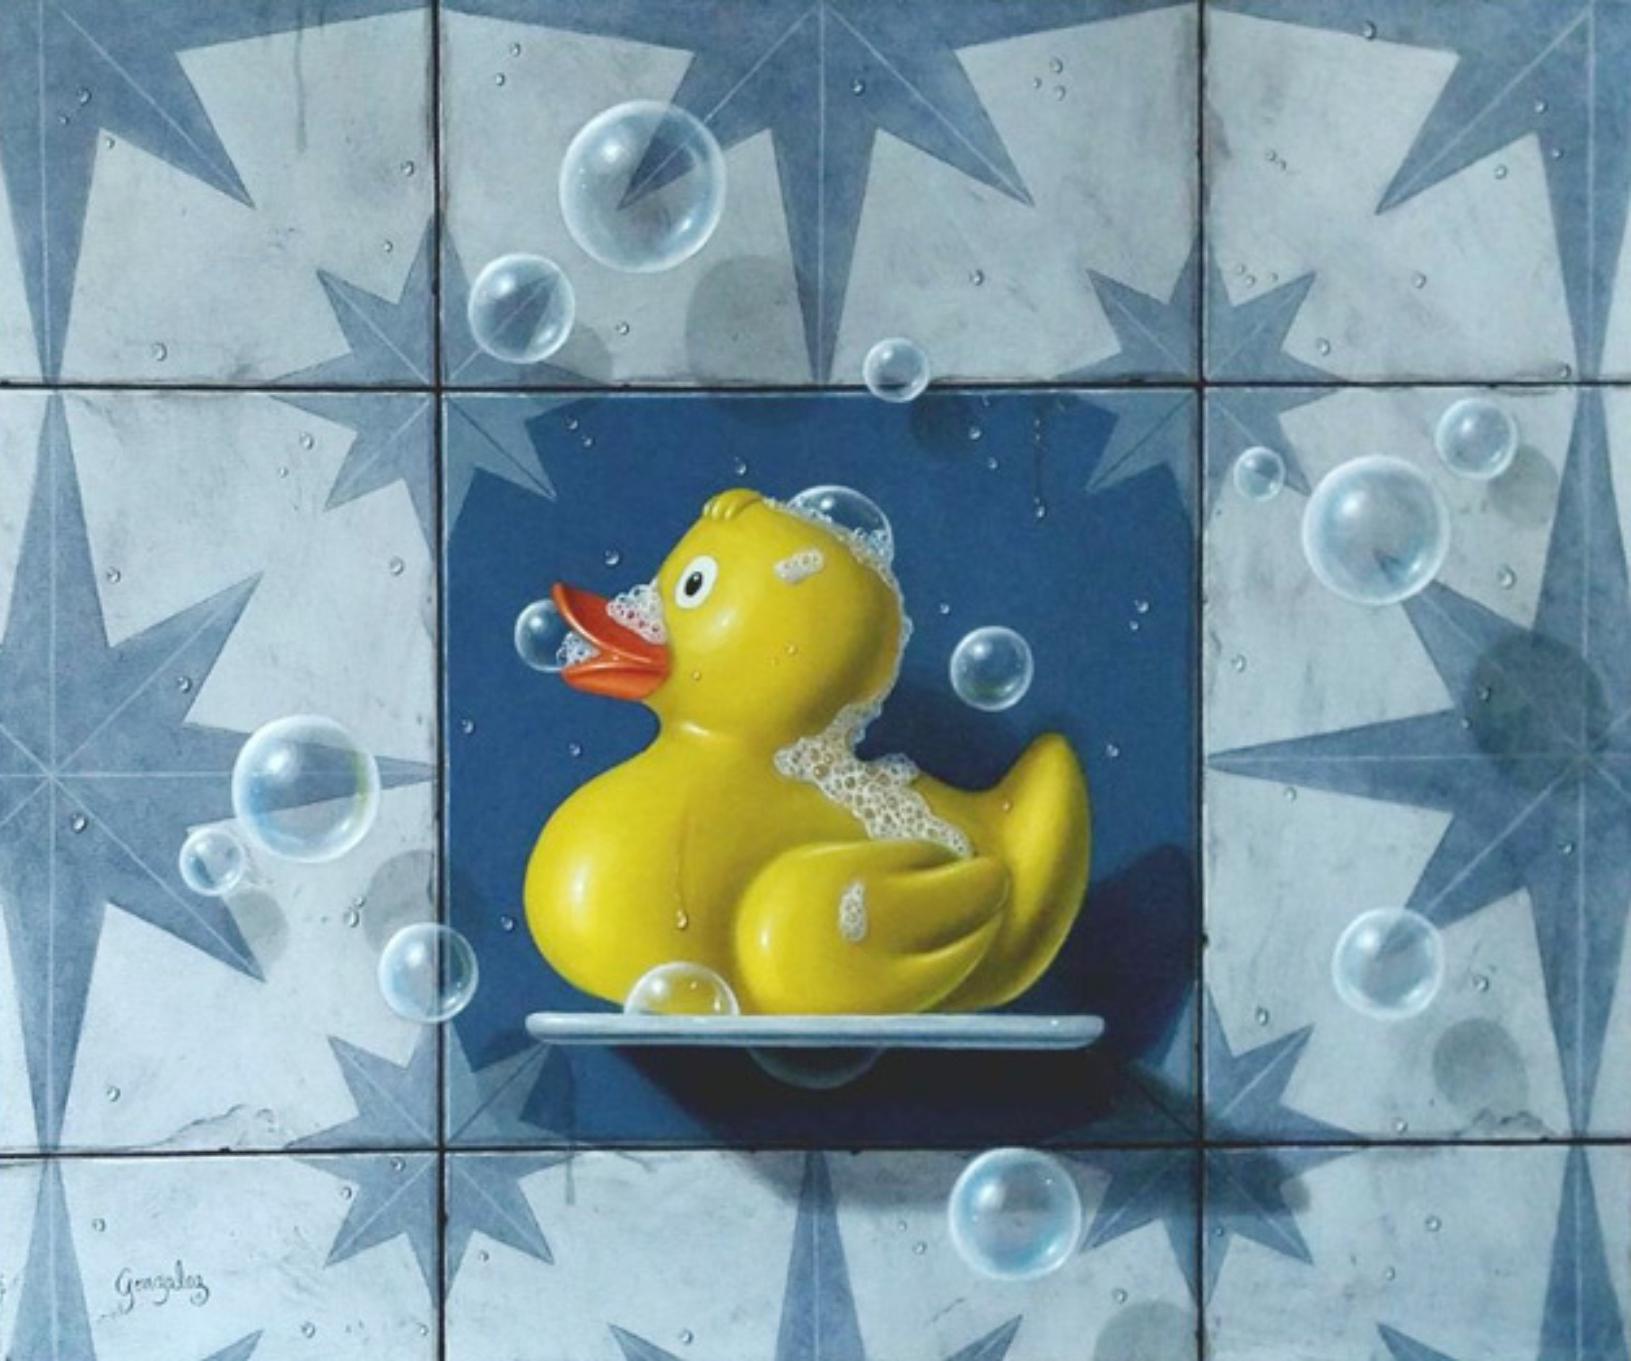 George A. Gonzalez Animal Painting - Rubber Ducky - original contemporary art, realistic oil painting, modern artwork